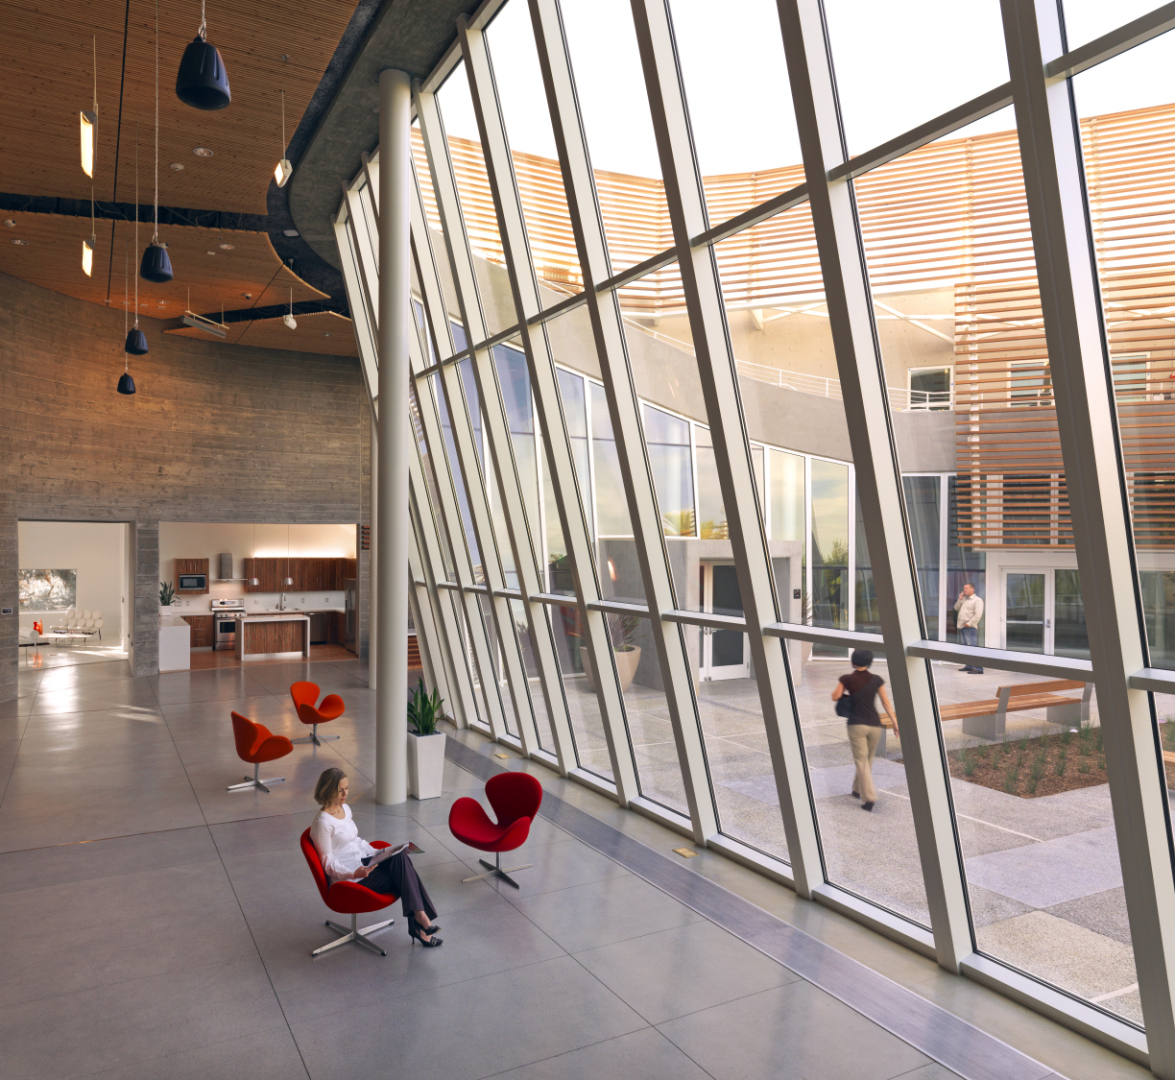 The Frontier Project showcases energy-efficient building design and passive daylighting systems.